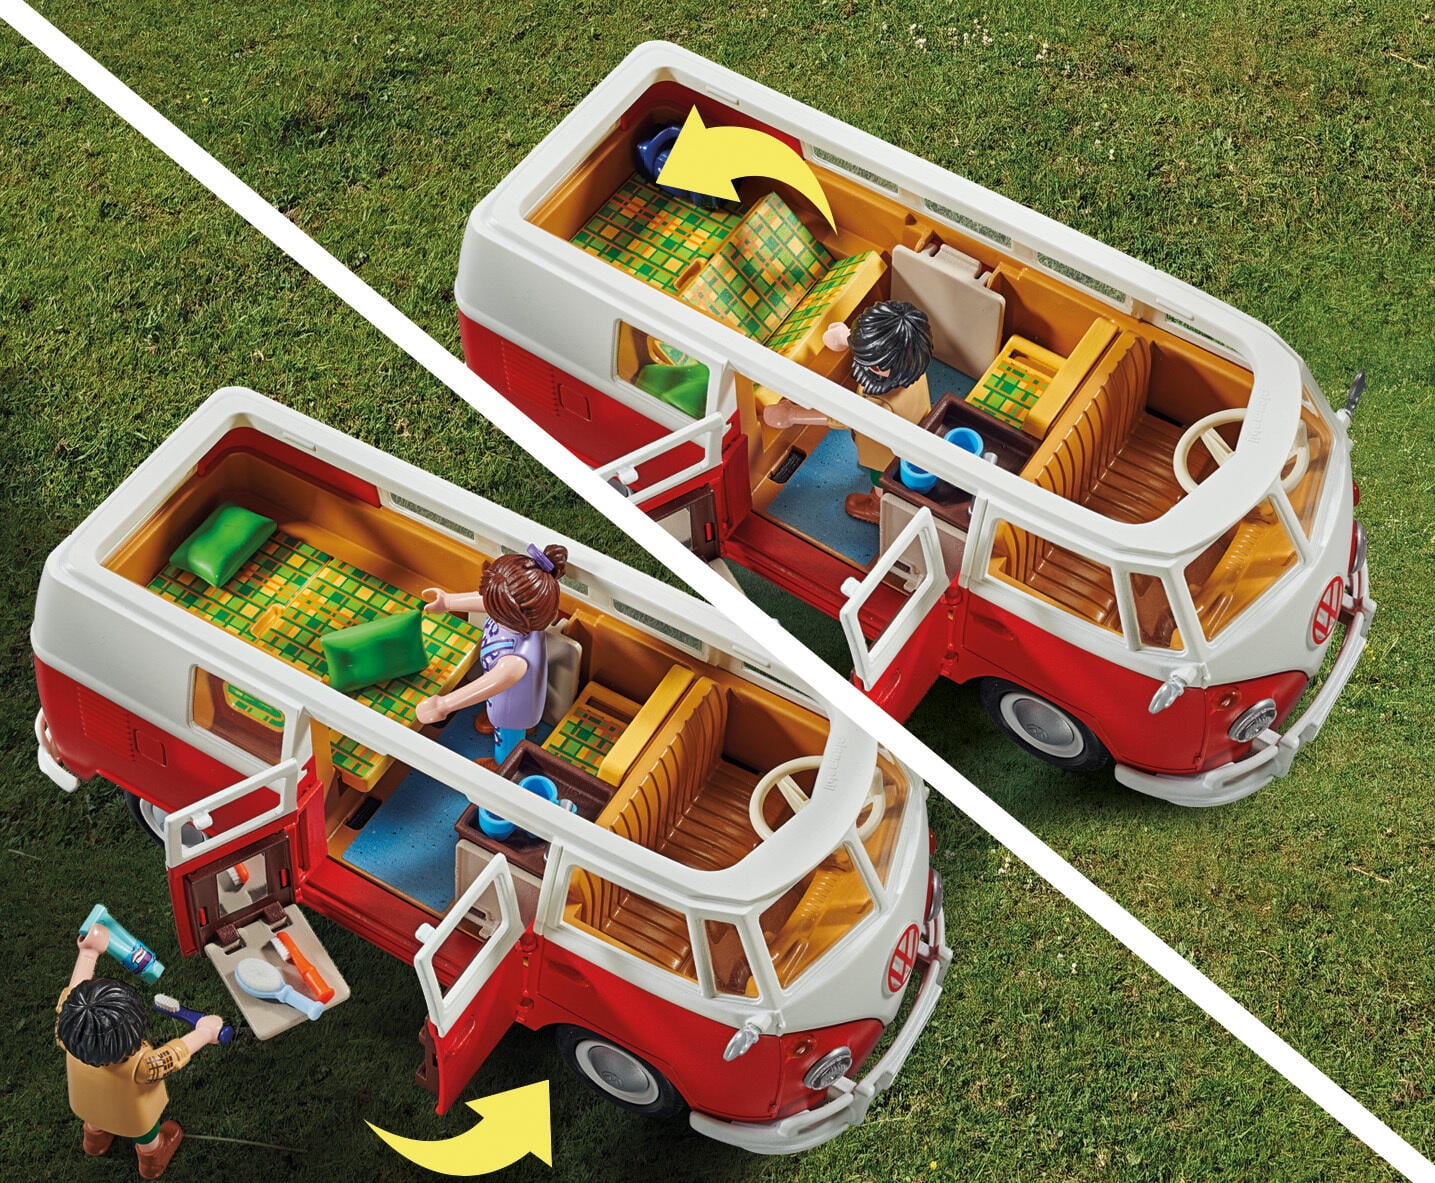 Volkswagen- Playmobil T1-Camping Bus - Spezial Edition